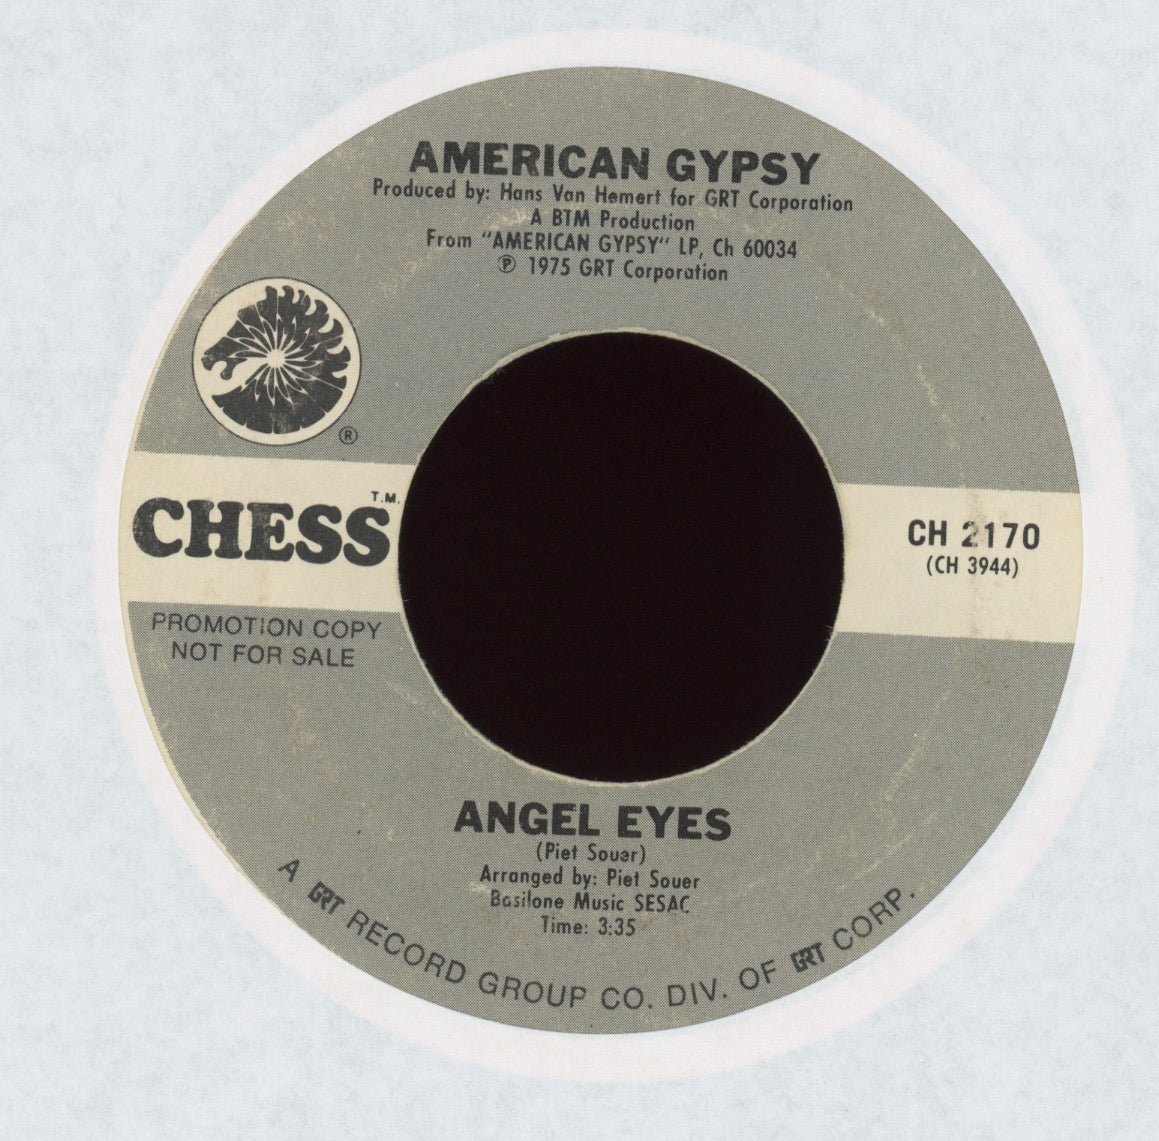 American Gypsy - 10,000 Miles on Chess Promo